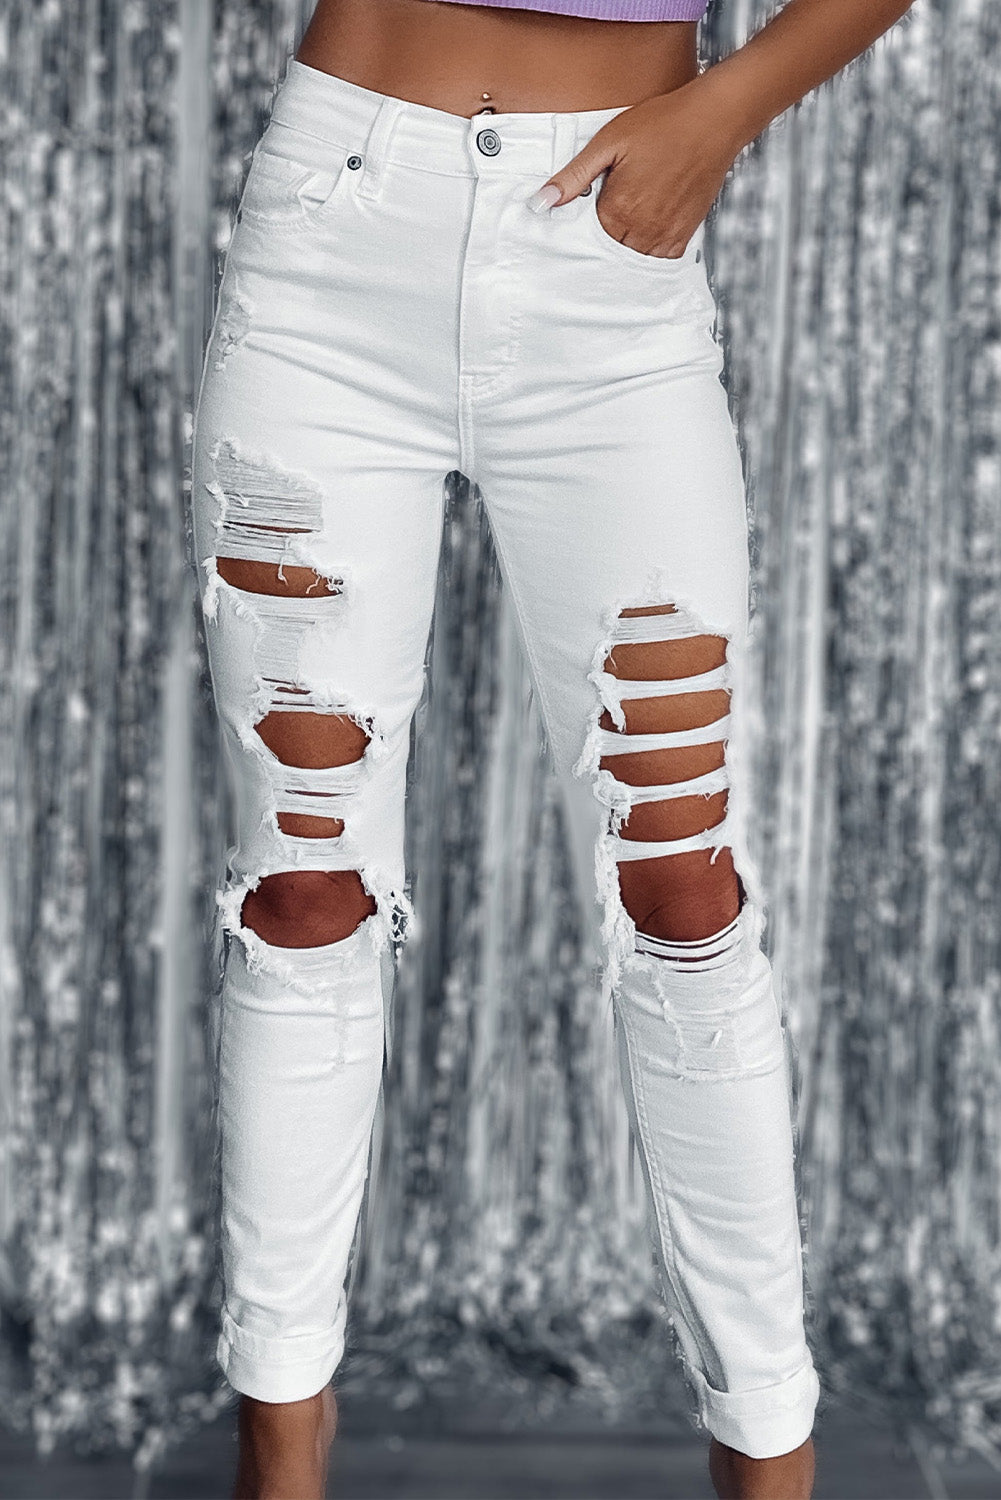 Distressed Ripped Holes High Waist Skinny Jeans